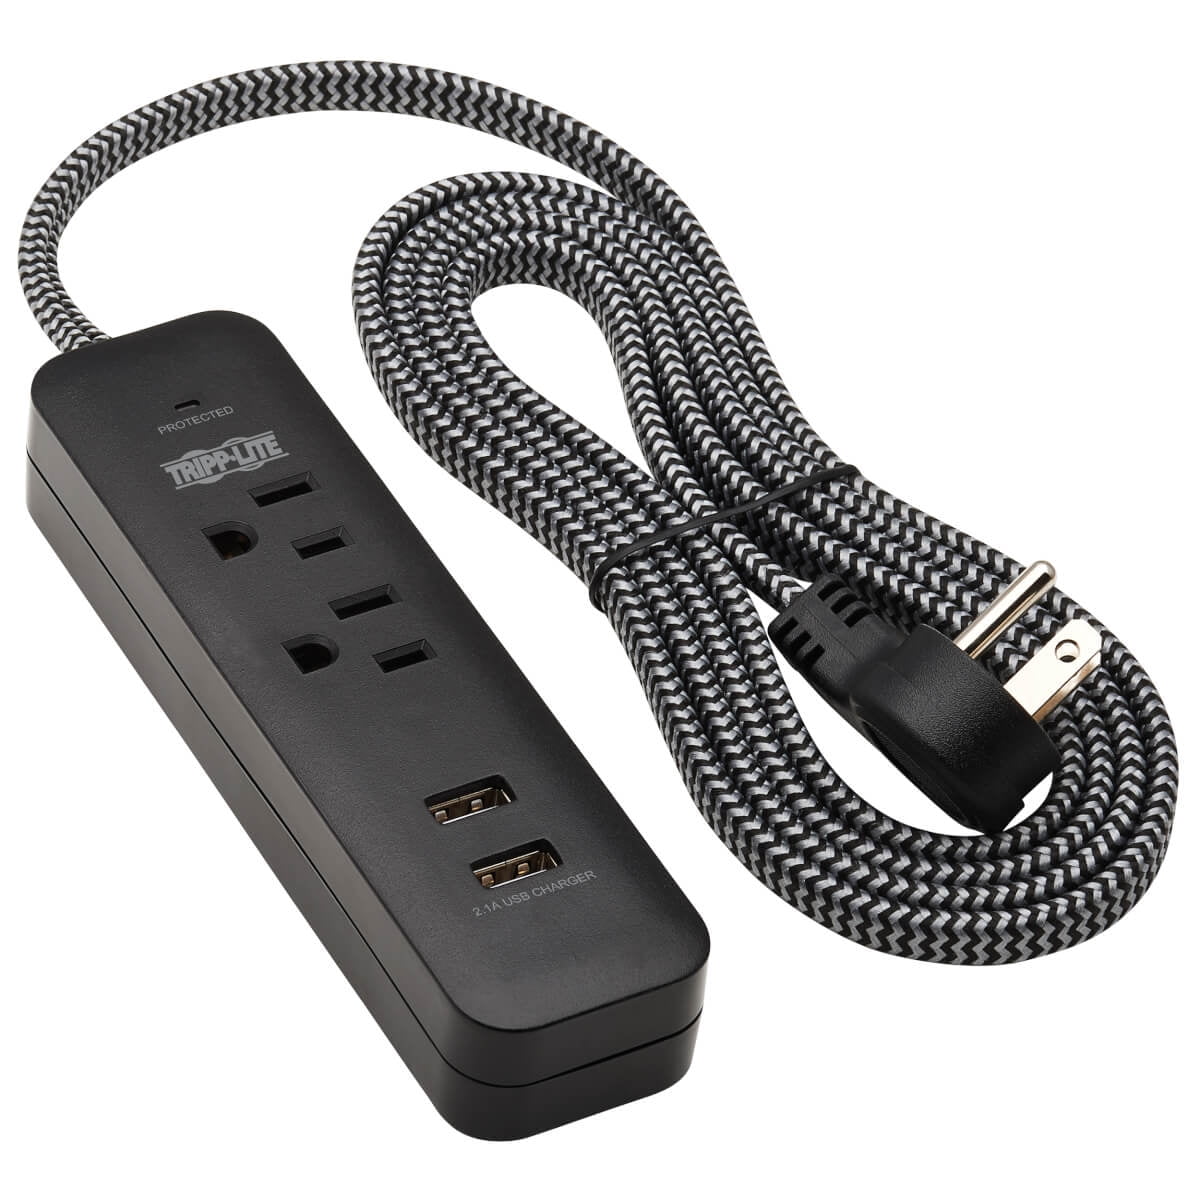 Cable Matters 12-Outlet Surge Protector with 2.1A Dual USB Charging Ports 